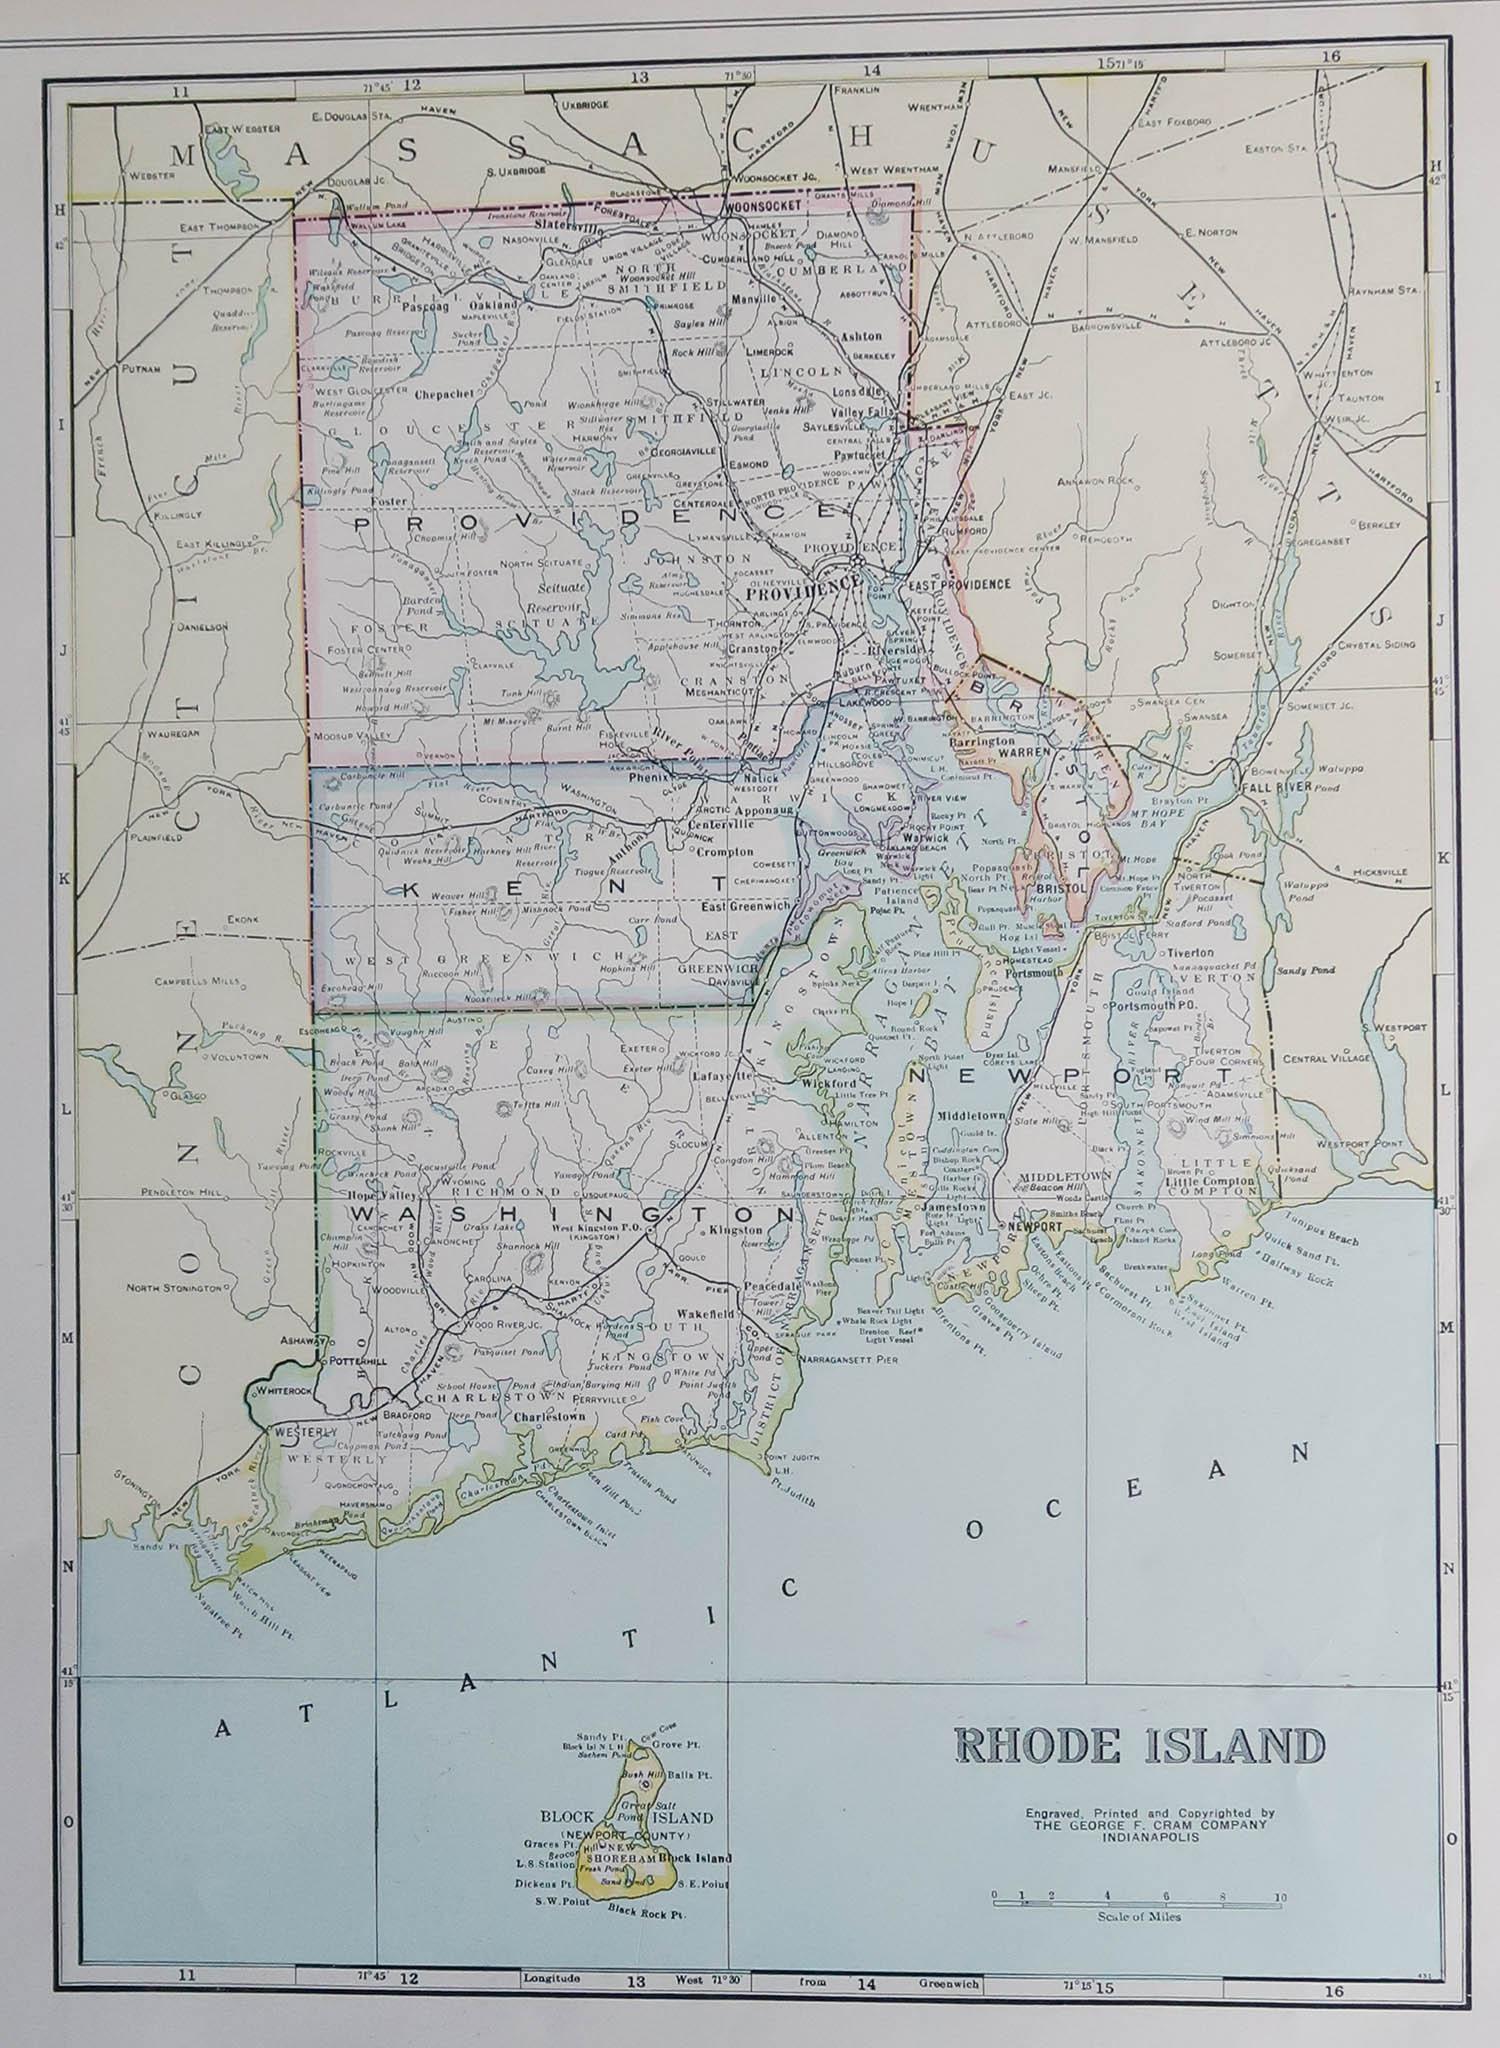 Fabulous map of Rhode Island

Original color

Engraved and printed by the George F. Cram Company, Indianapolis.

Published, C.1900

Unframed

Free shipping.